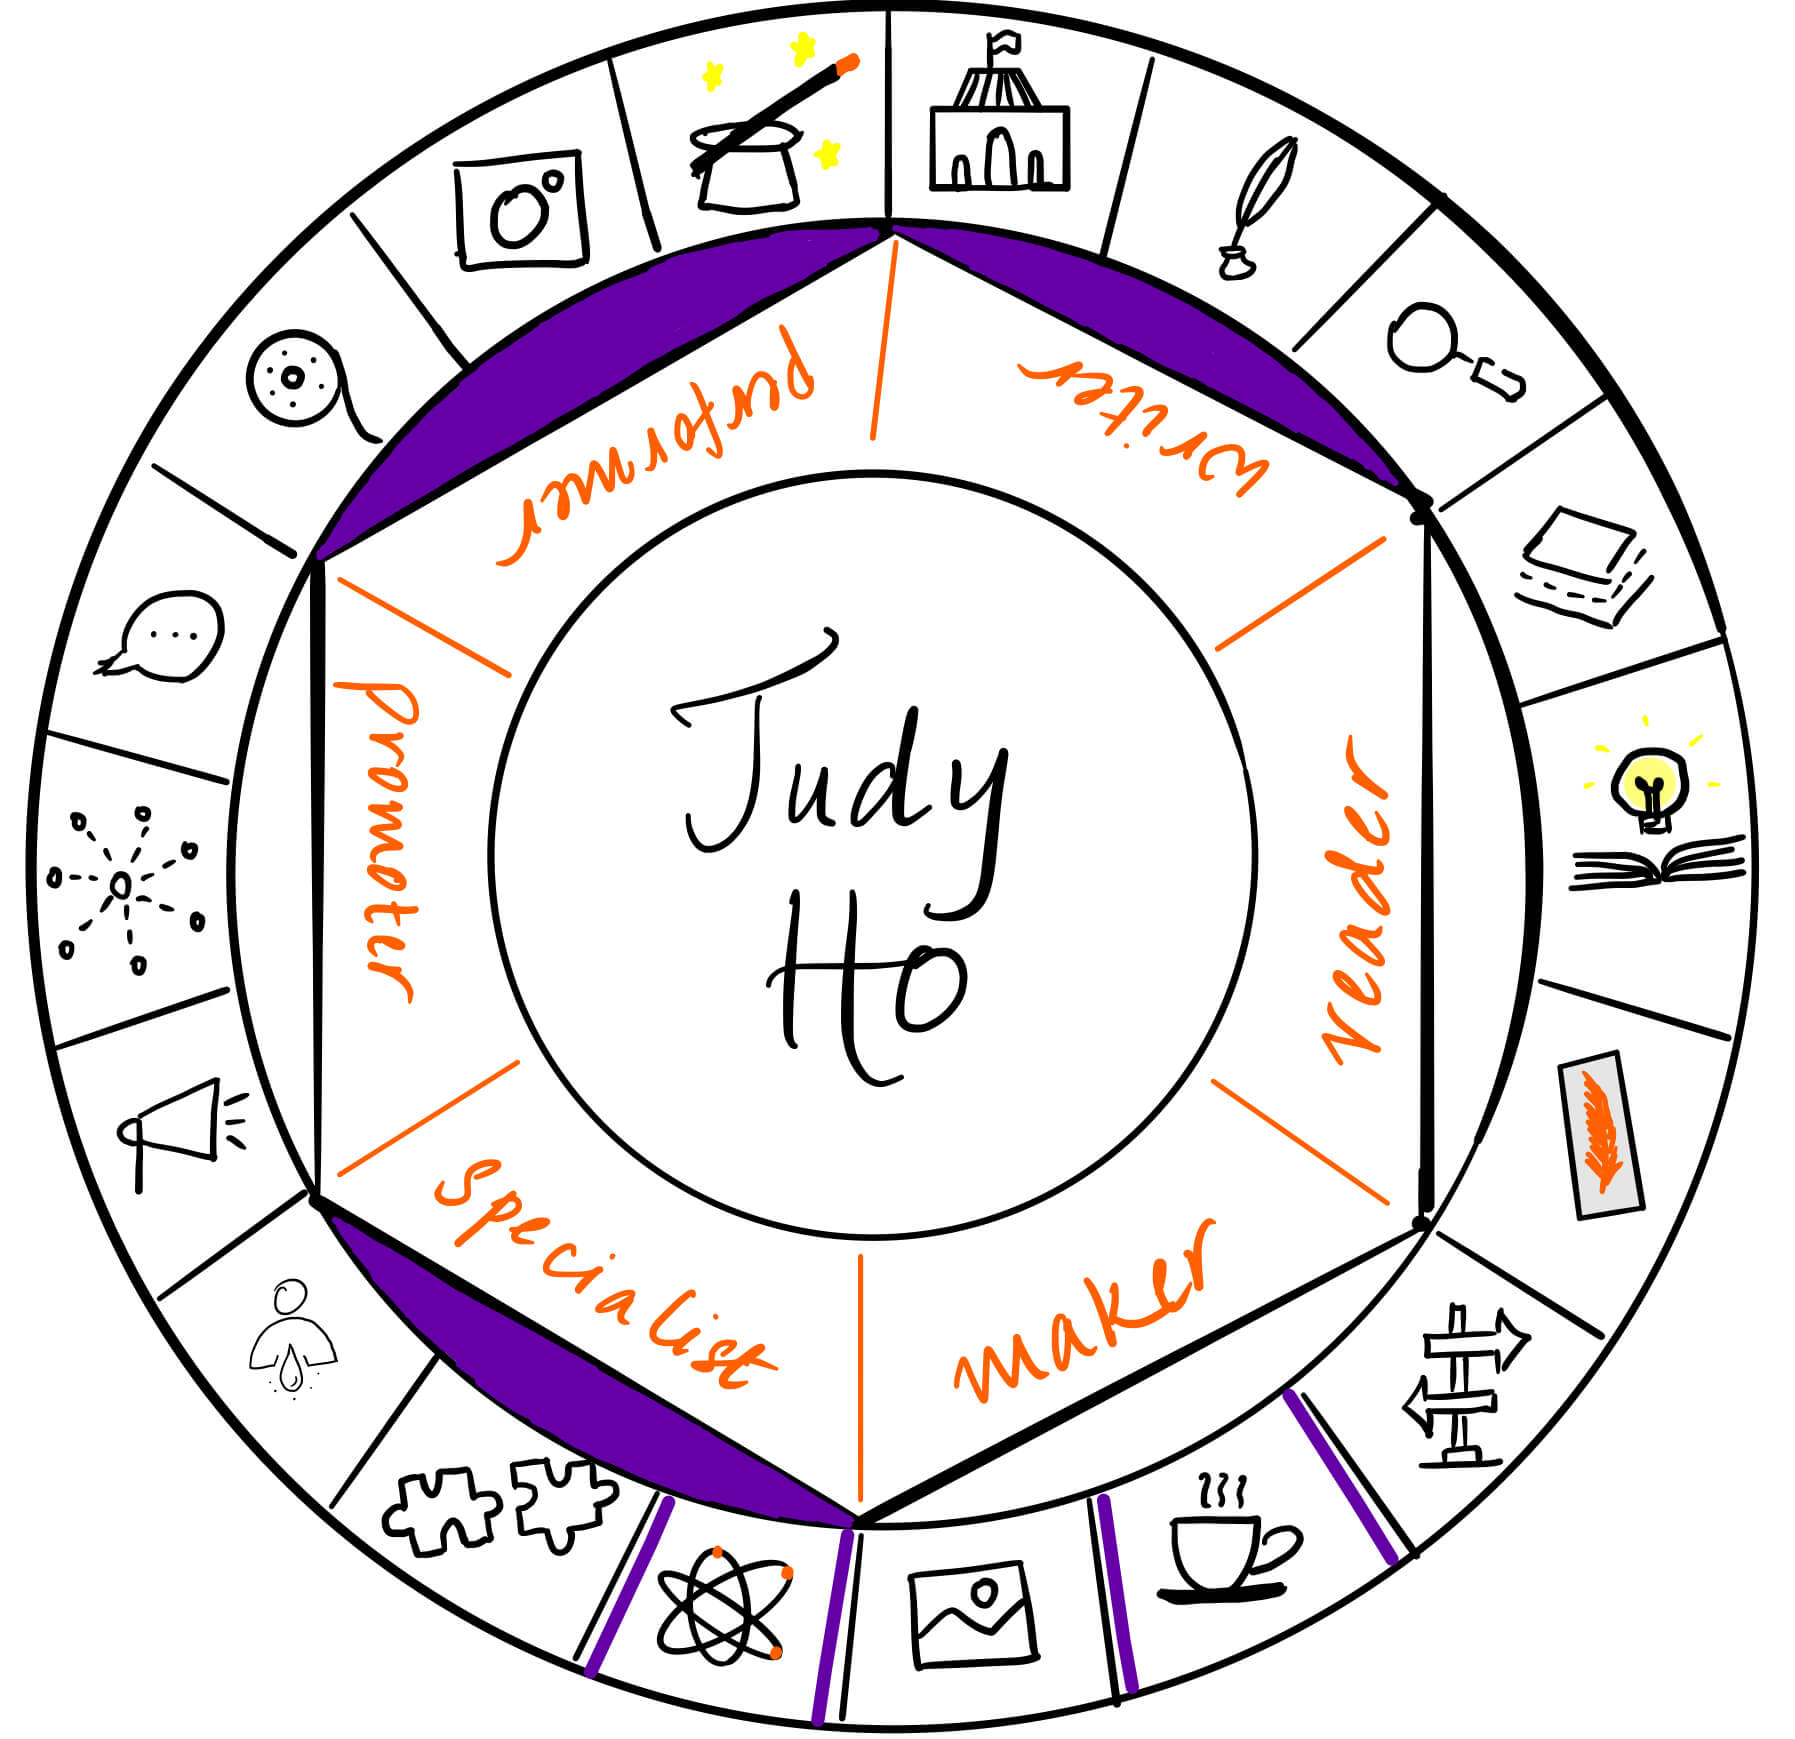 Judy Ho is a writer, performer and specialist. It's a pleasure to have her over on The Creator's Roulette to talk about psychology and our self-sabotage tendencies.